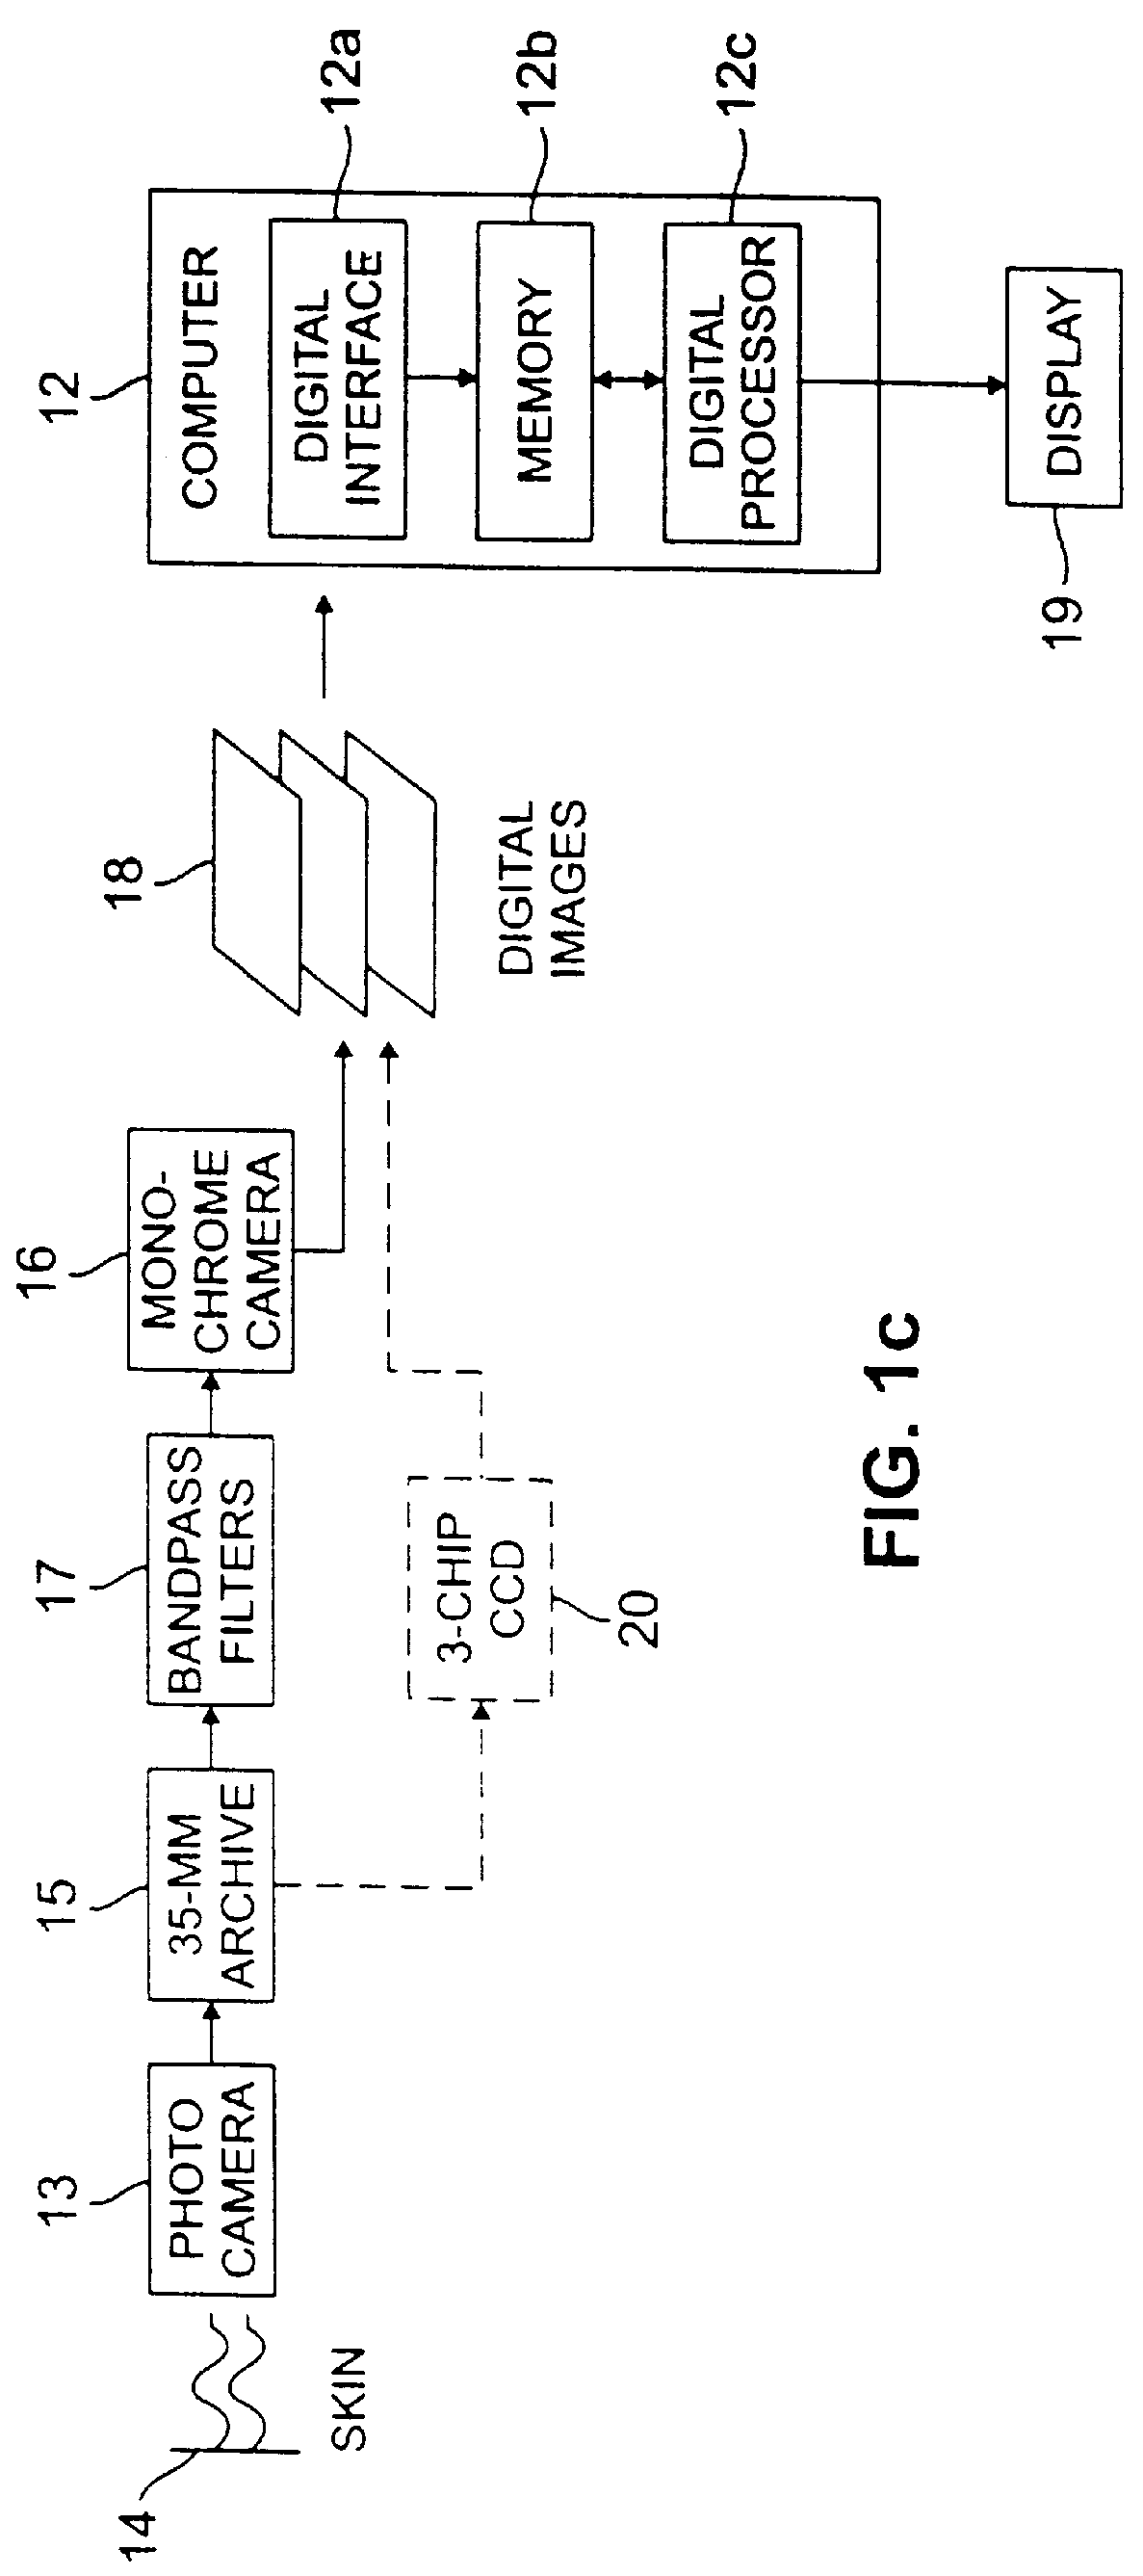 Systems and methods for the multispectral imaging and characterization of skin tissue